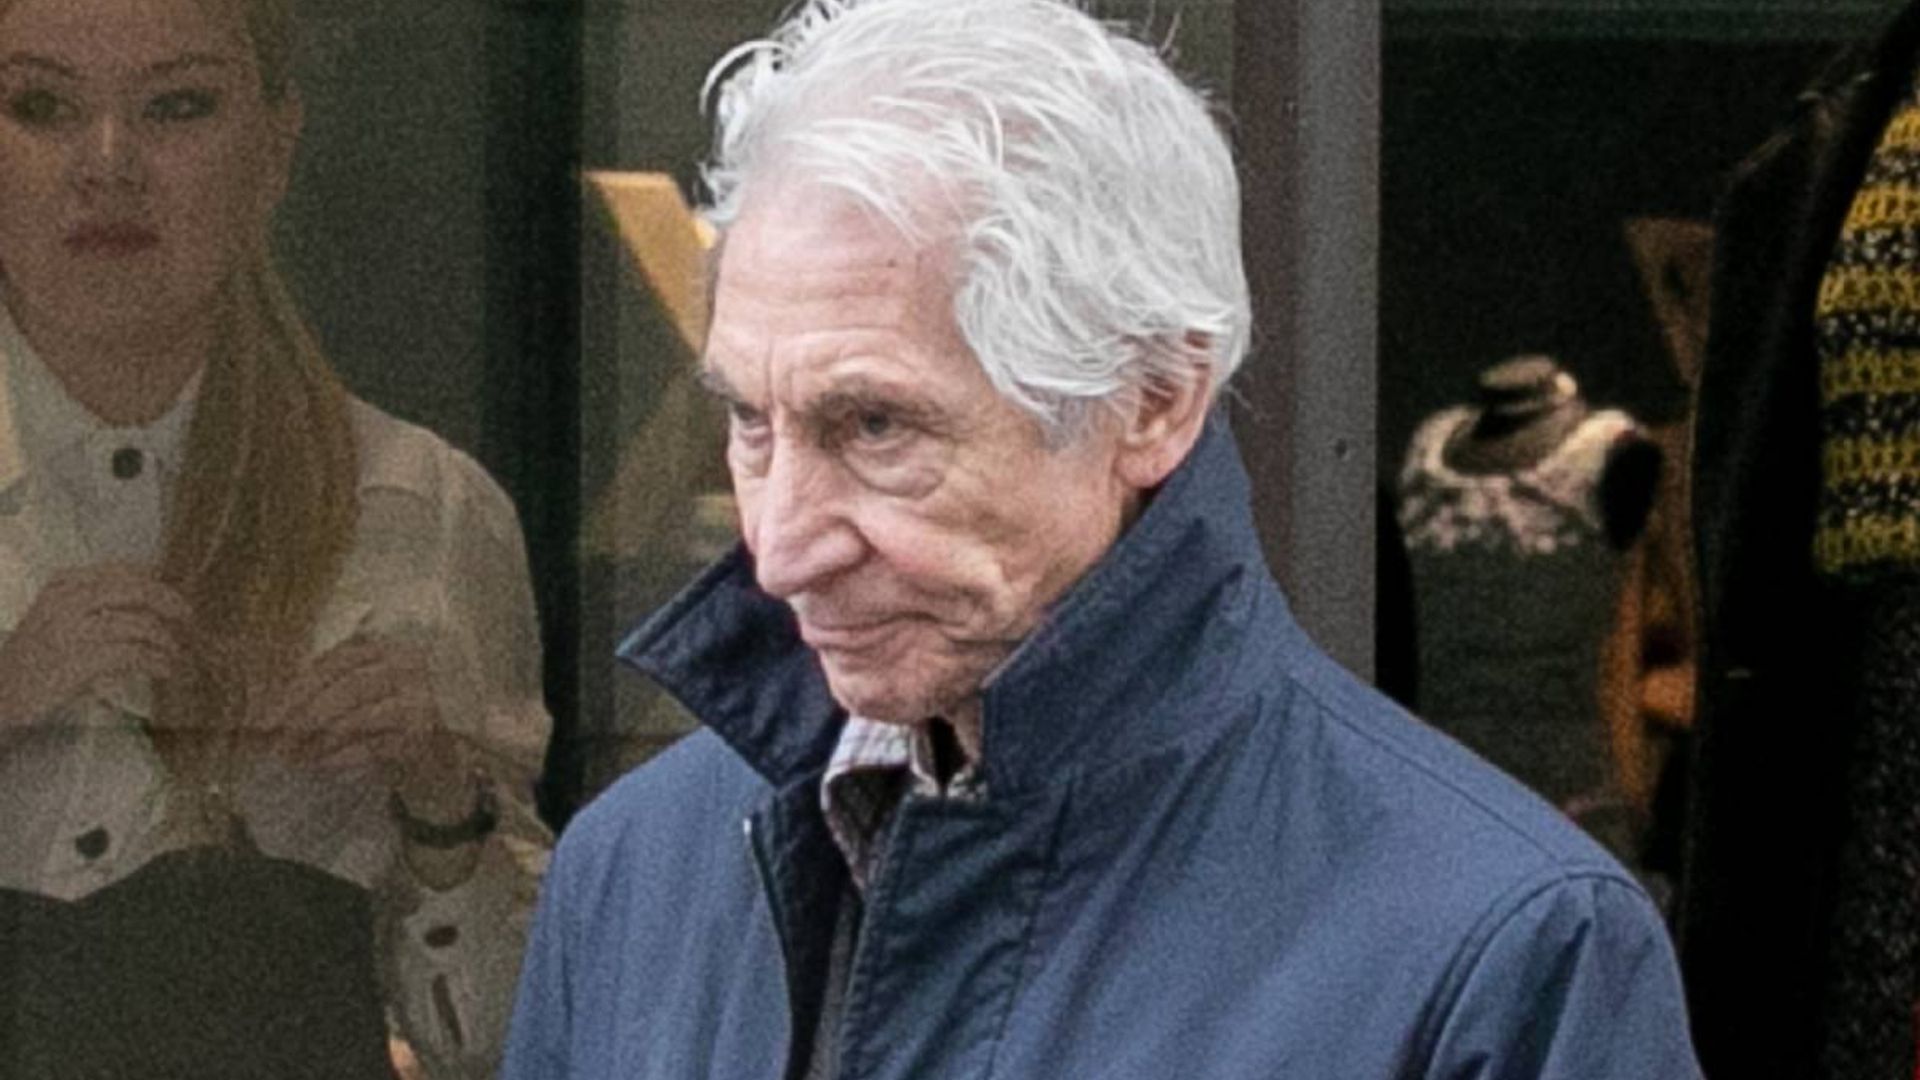 Rolling Stones star Charlie Watts, 80, undergoes emergency surgery and pulls out of US tour